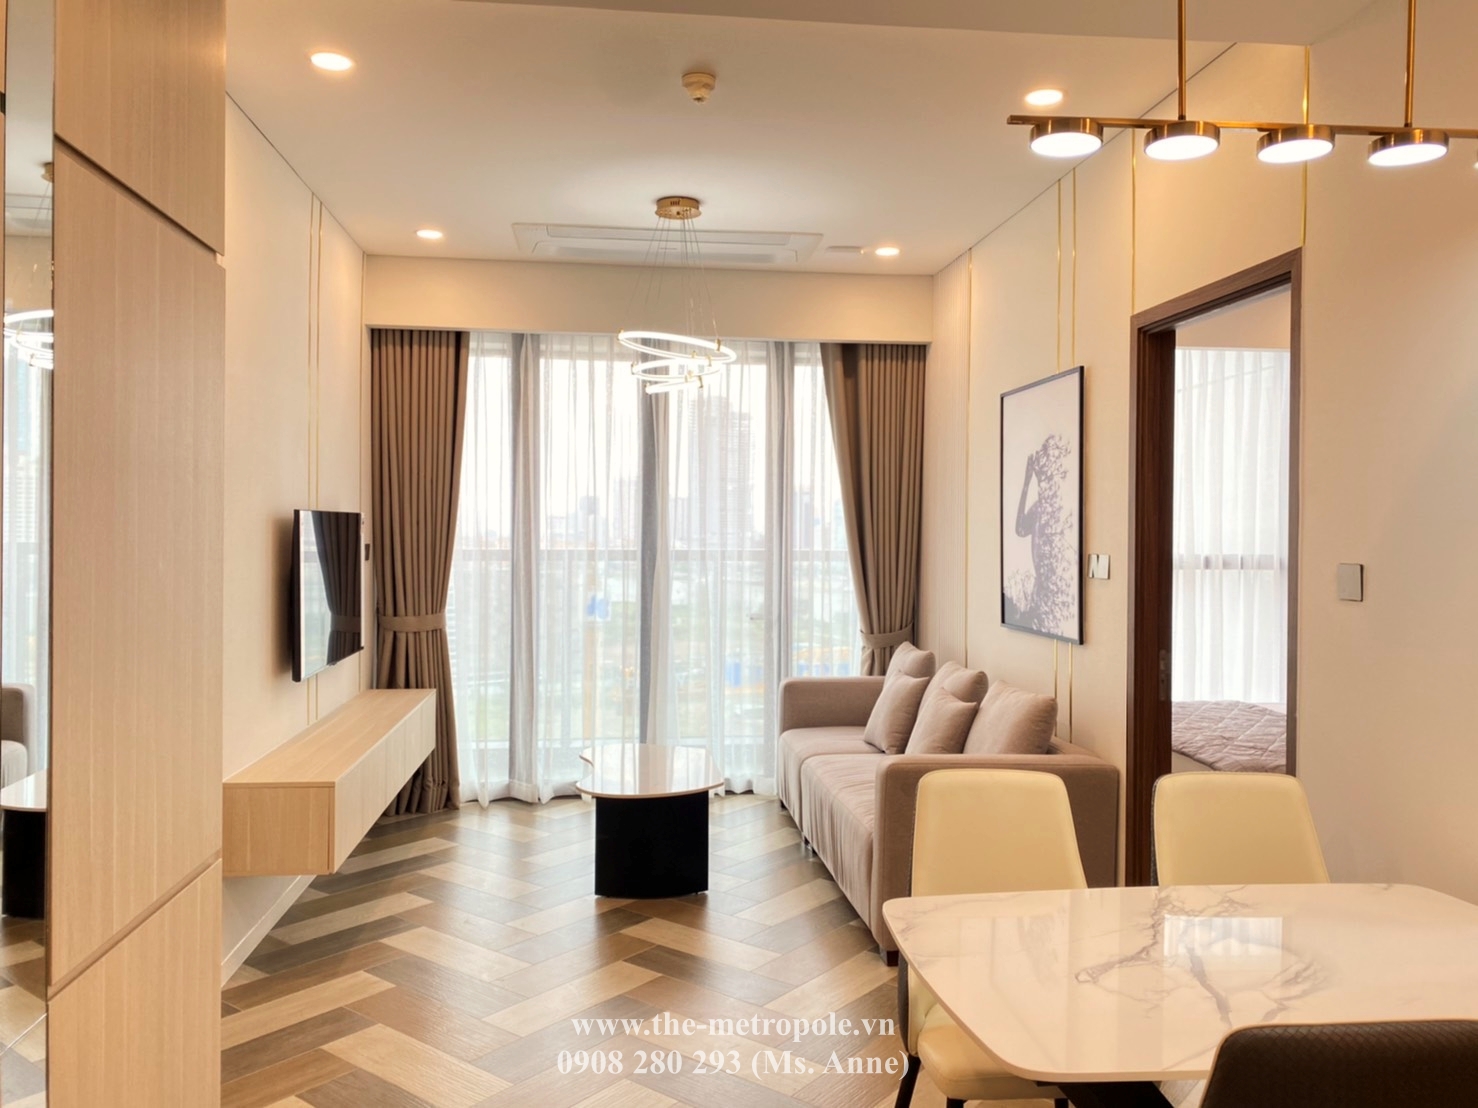 A low rental 1 bedroom apartment in The Metropole Thu Thiem for rent